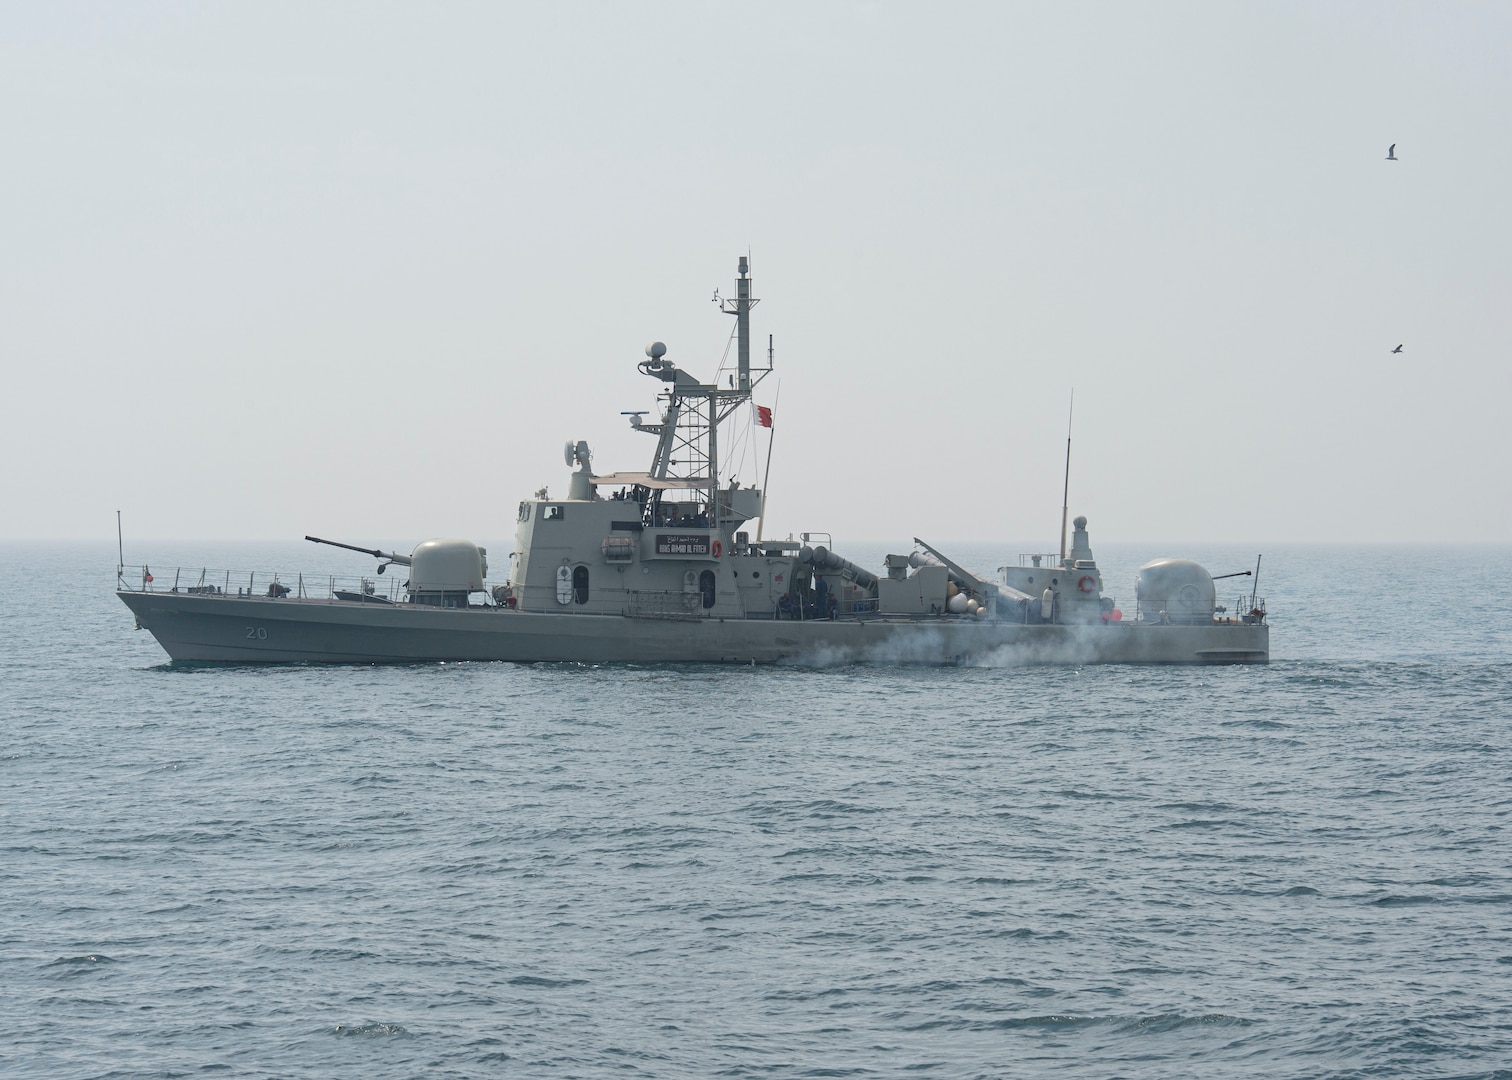 230226-N-NH267-1088 ARABIAN GULF (Feb. 26, 2023) Royal Bahrain Naval Force ship RBNS Ahmad Al Fateh (P20) sails in the Arabian Gulf near guided-missile destroyer USS Paul Hamilton (DDG 60), Feb. 26, 2023. Paul Hamilton is deployed to the U.S. 5th Fleet area of operations to help ensure maritime security and stability in the Middle East region.